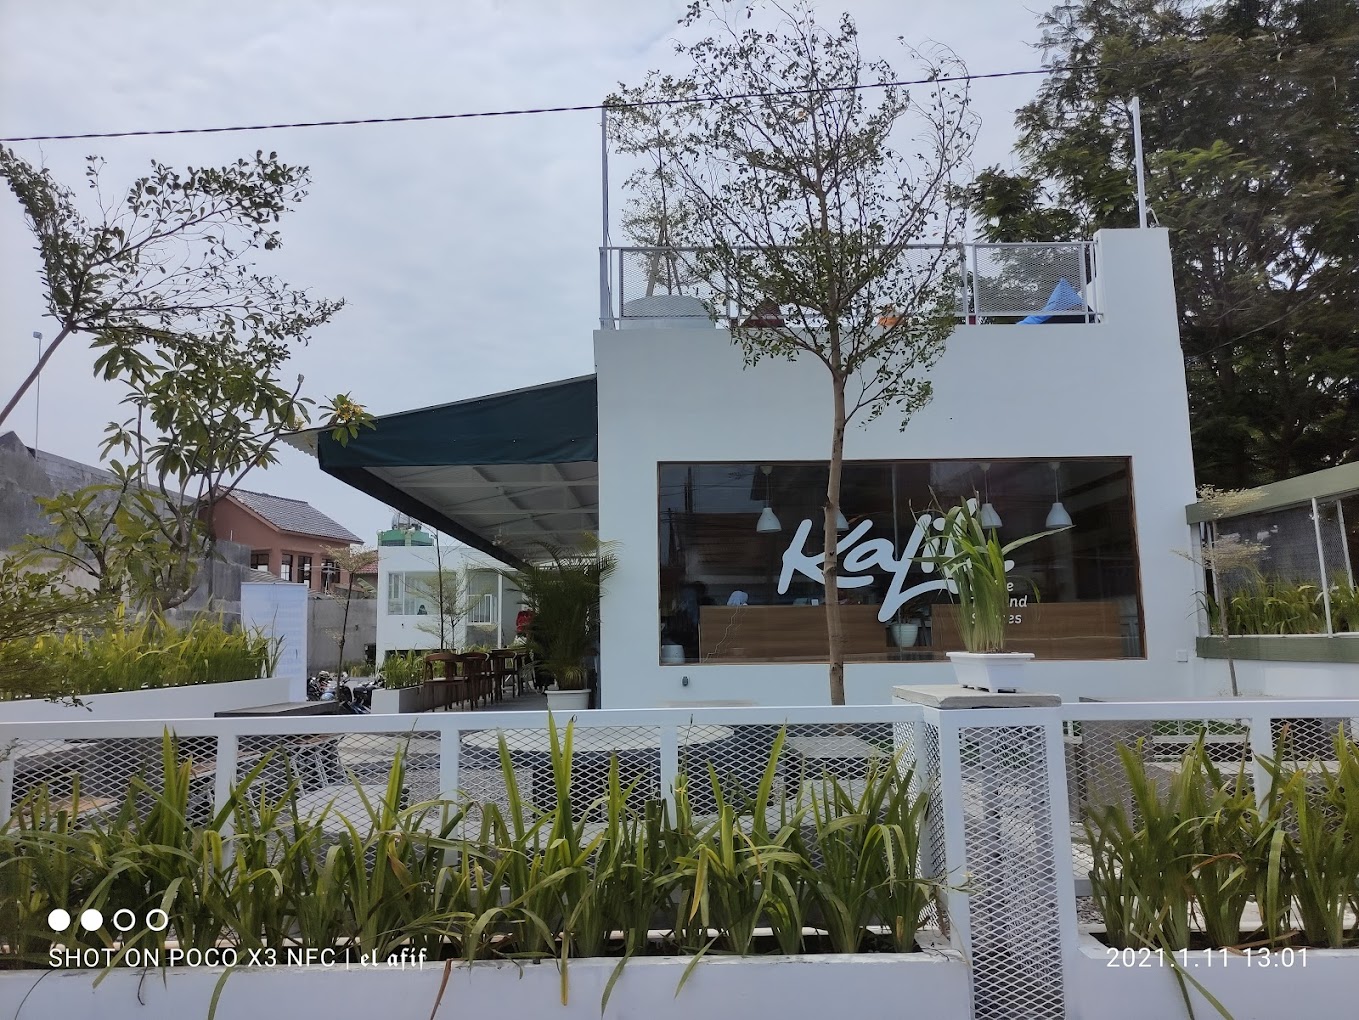 Cafe Tegal, Kalih Signature Coffee and Eatery